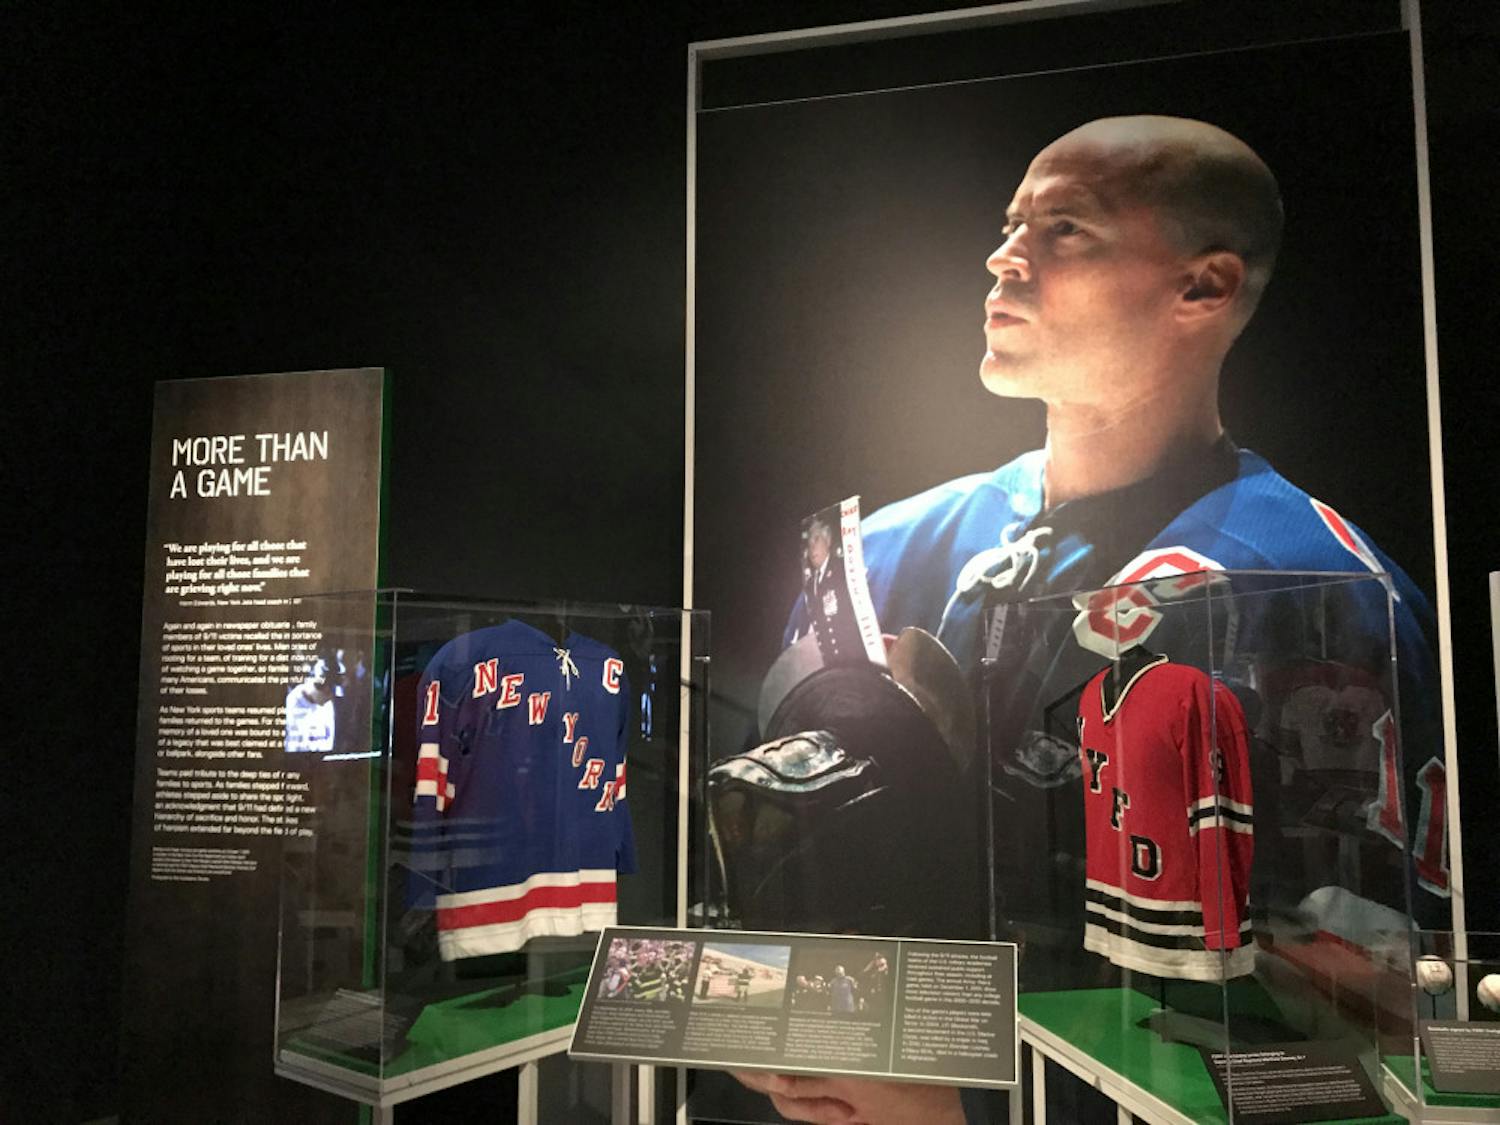 The 9/11 Museum opened an exhibit dedicated to sports culture following that tragic day in history. Mark Messier of the New York Rangers wasn’t sure when the best time to resume sports again would happen, but after playing his first game back on the  ice, he knew it was the right time.